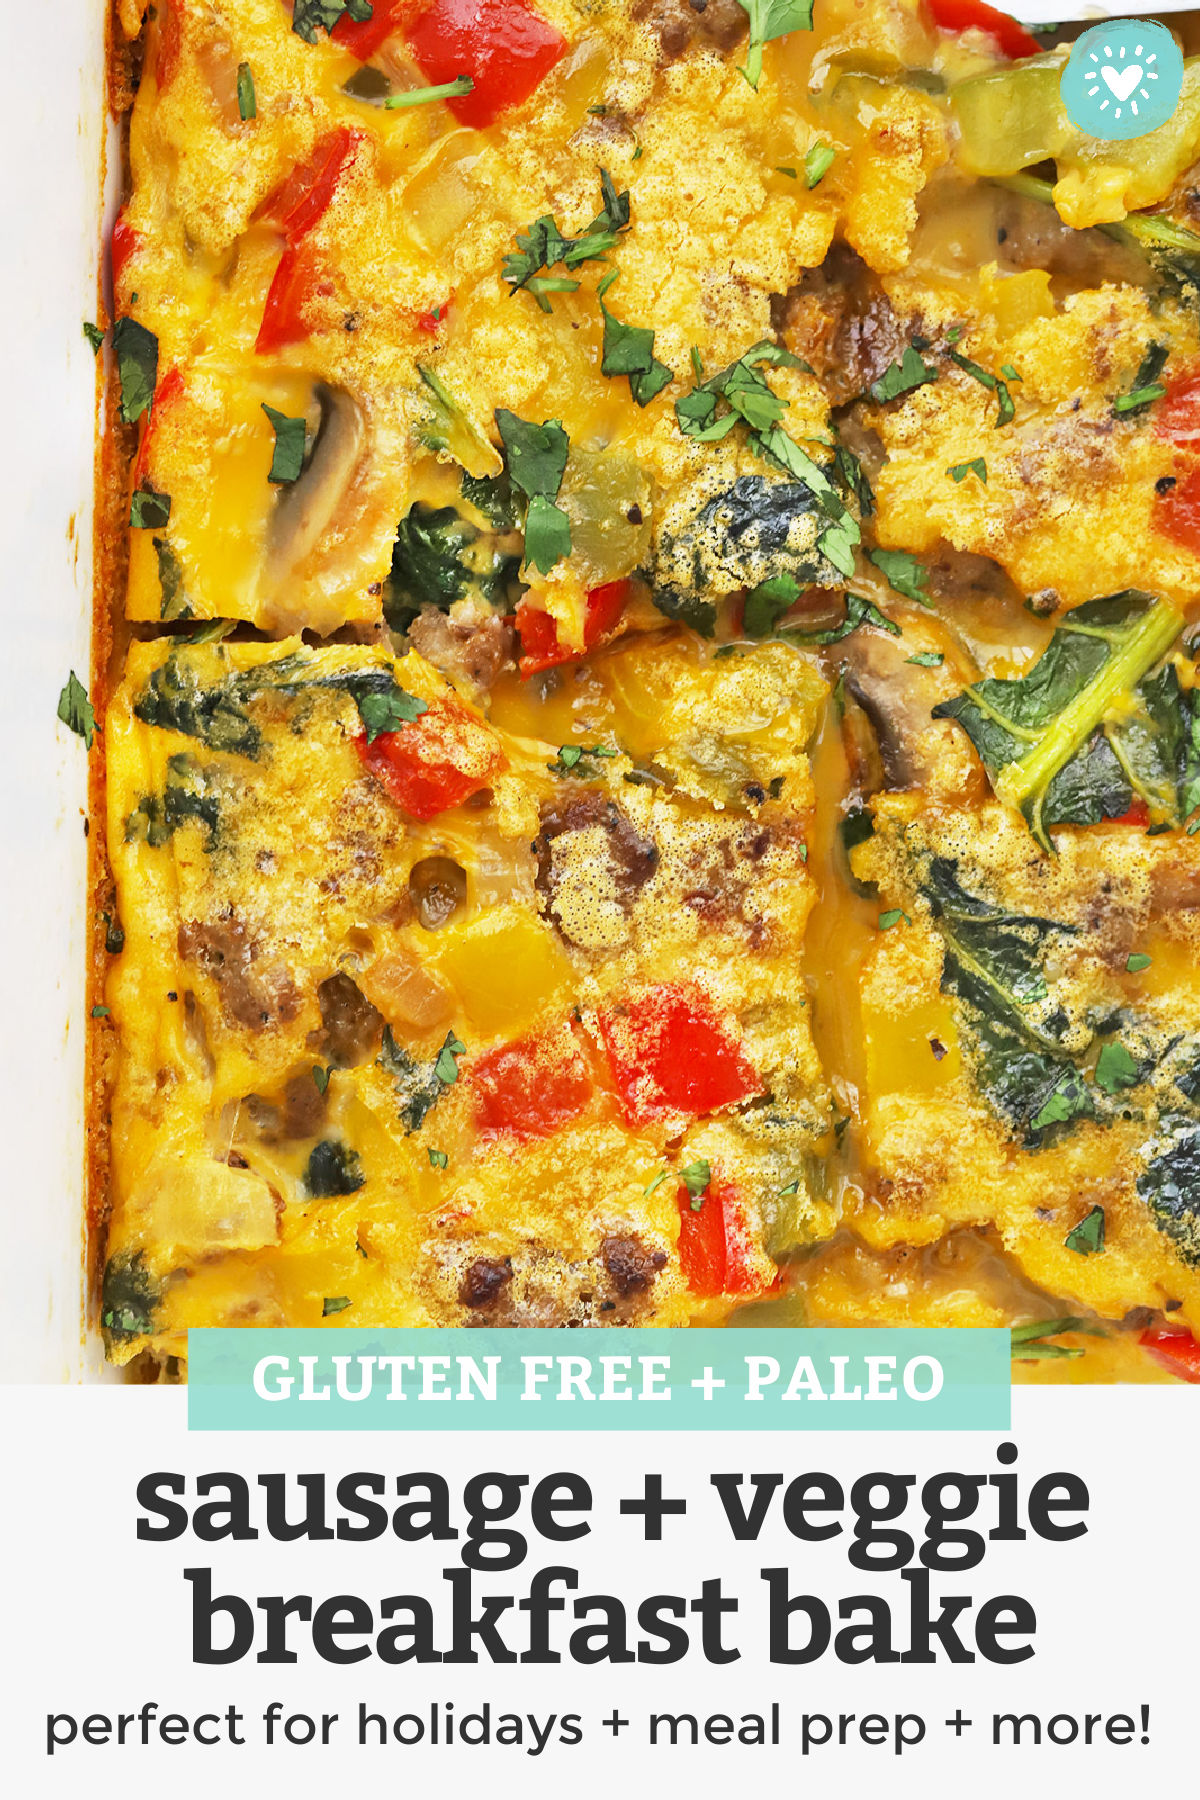 Sausage and Veggie Breakfast Bake - This cozy sausage veggie breakfast casserole is perfect for holidays, get-togethers, or meal prep. It reheats like a dream and tastes fantastic! // Meal prep breakfast // Paleo egg casserole // whole30 breakfast casserole #breakfast #eggcasserole #eggbake #paleo #whole30 #breakfastbake